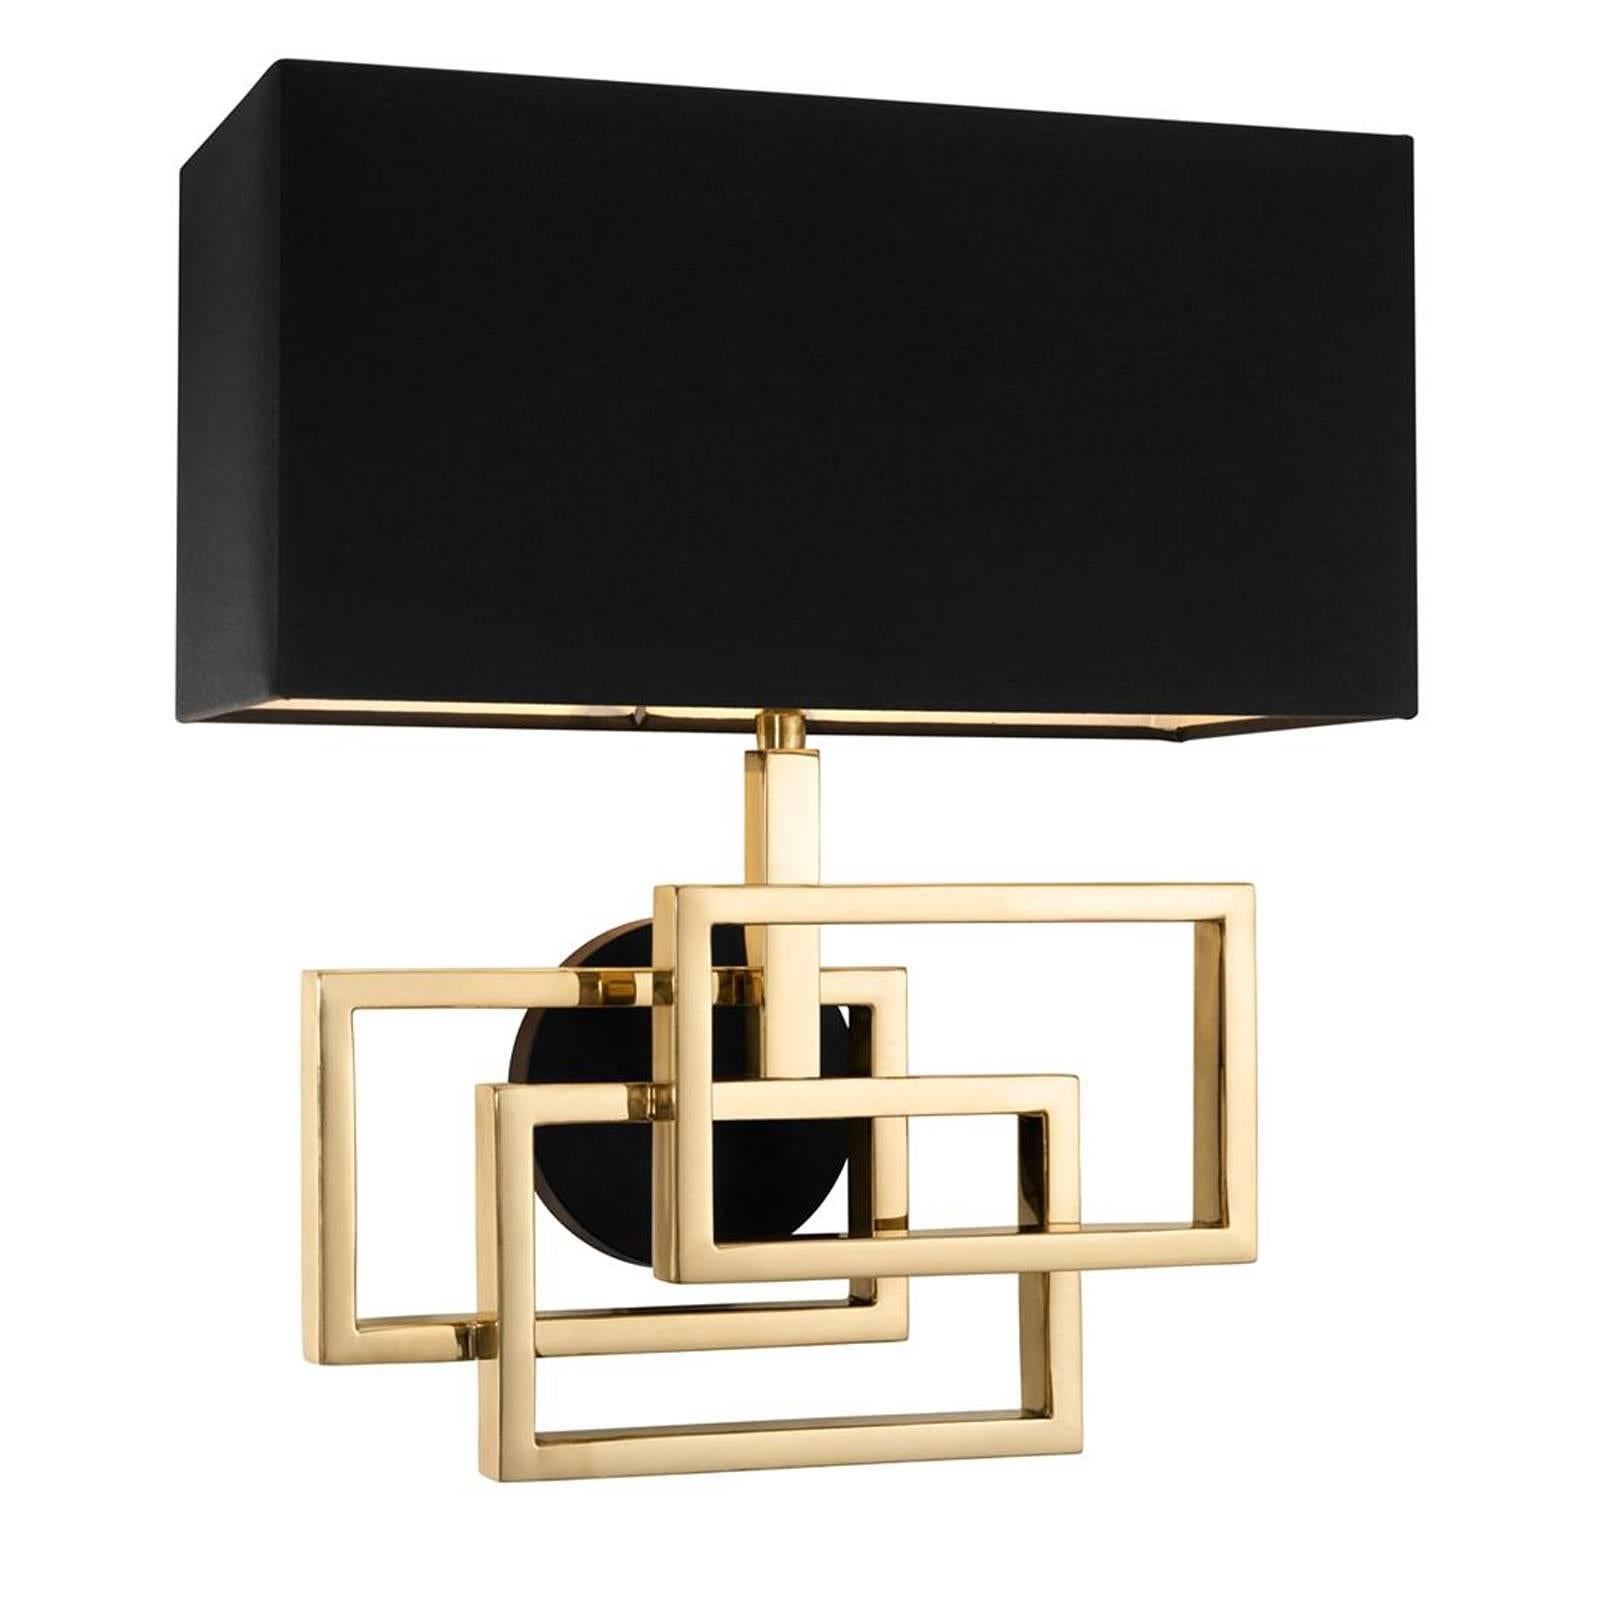 Frames Wall Lamp in Polished Brass or in Nickel Finish